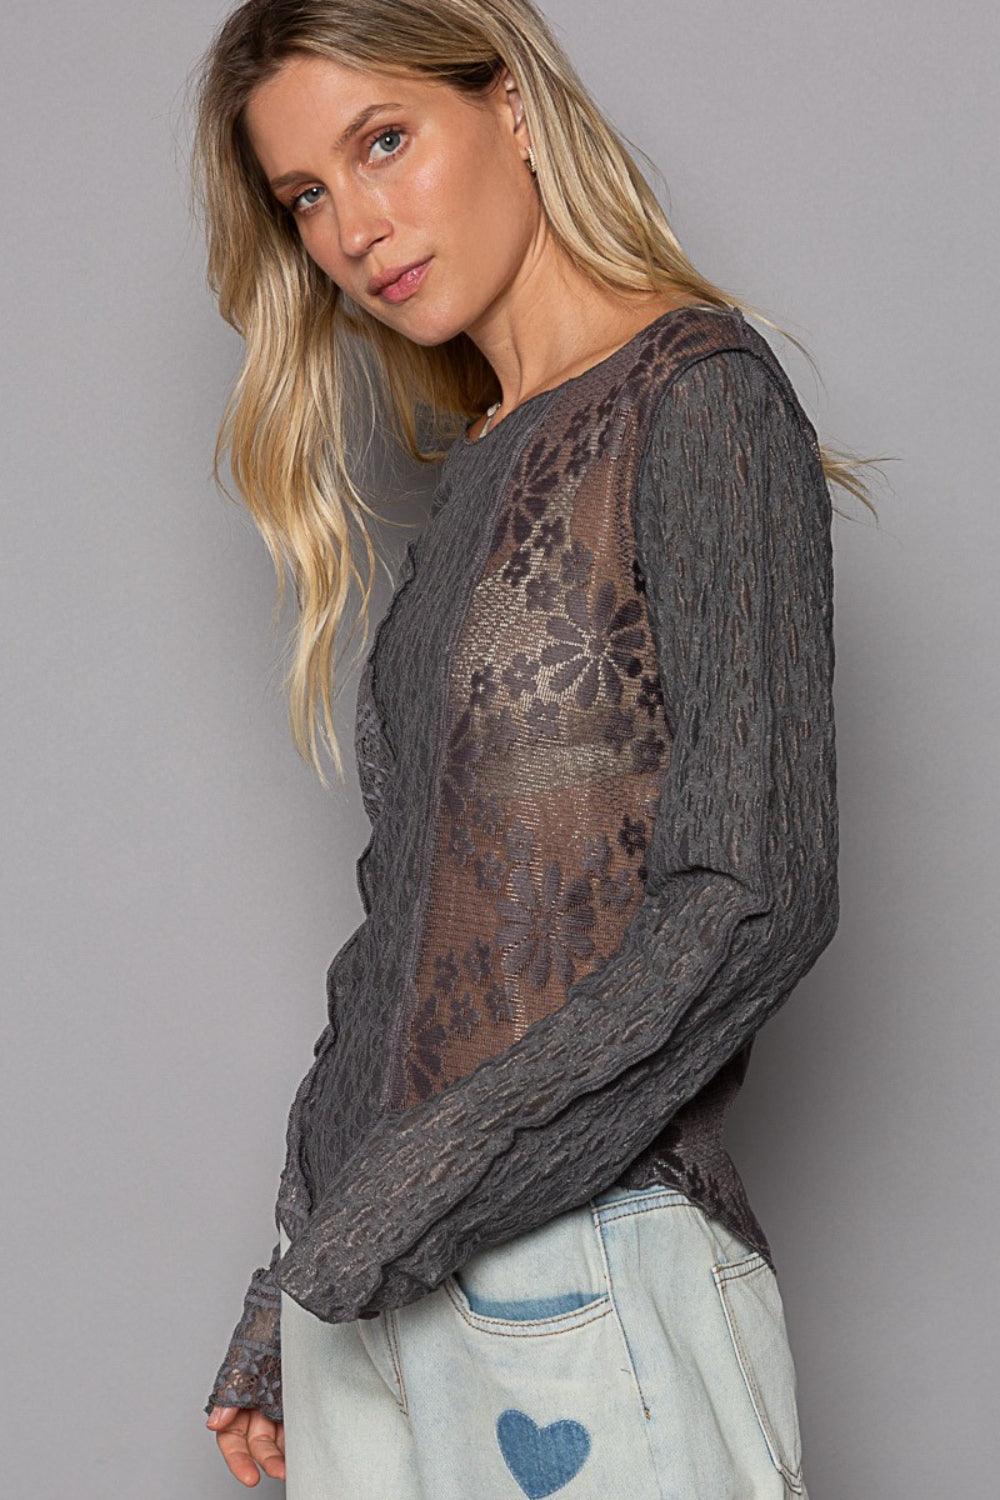 Women's Shirts POL Exposed Seam Long Sleeve Lace Knit Top